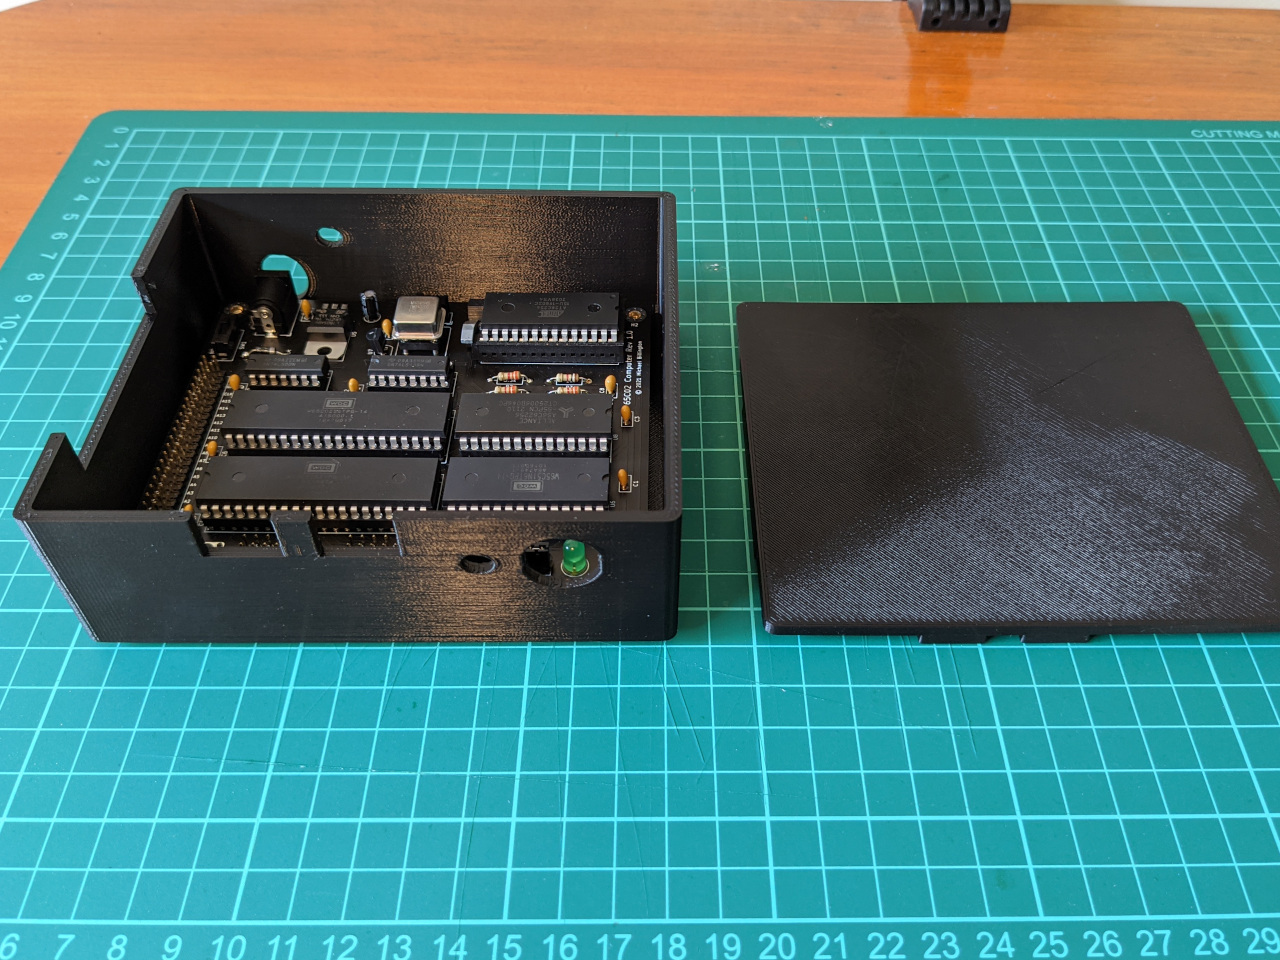 Looking for a project to pass the time? Try 3D printing a NAS box